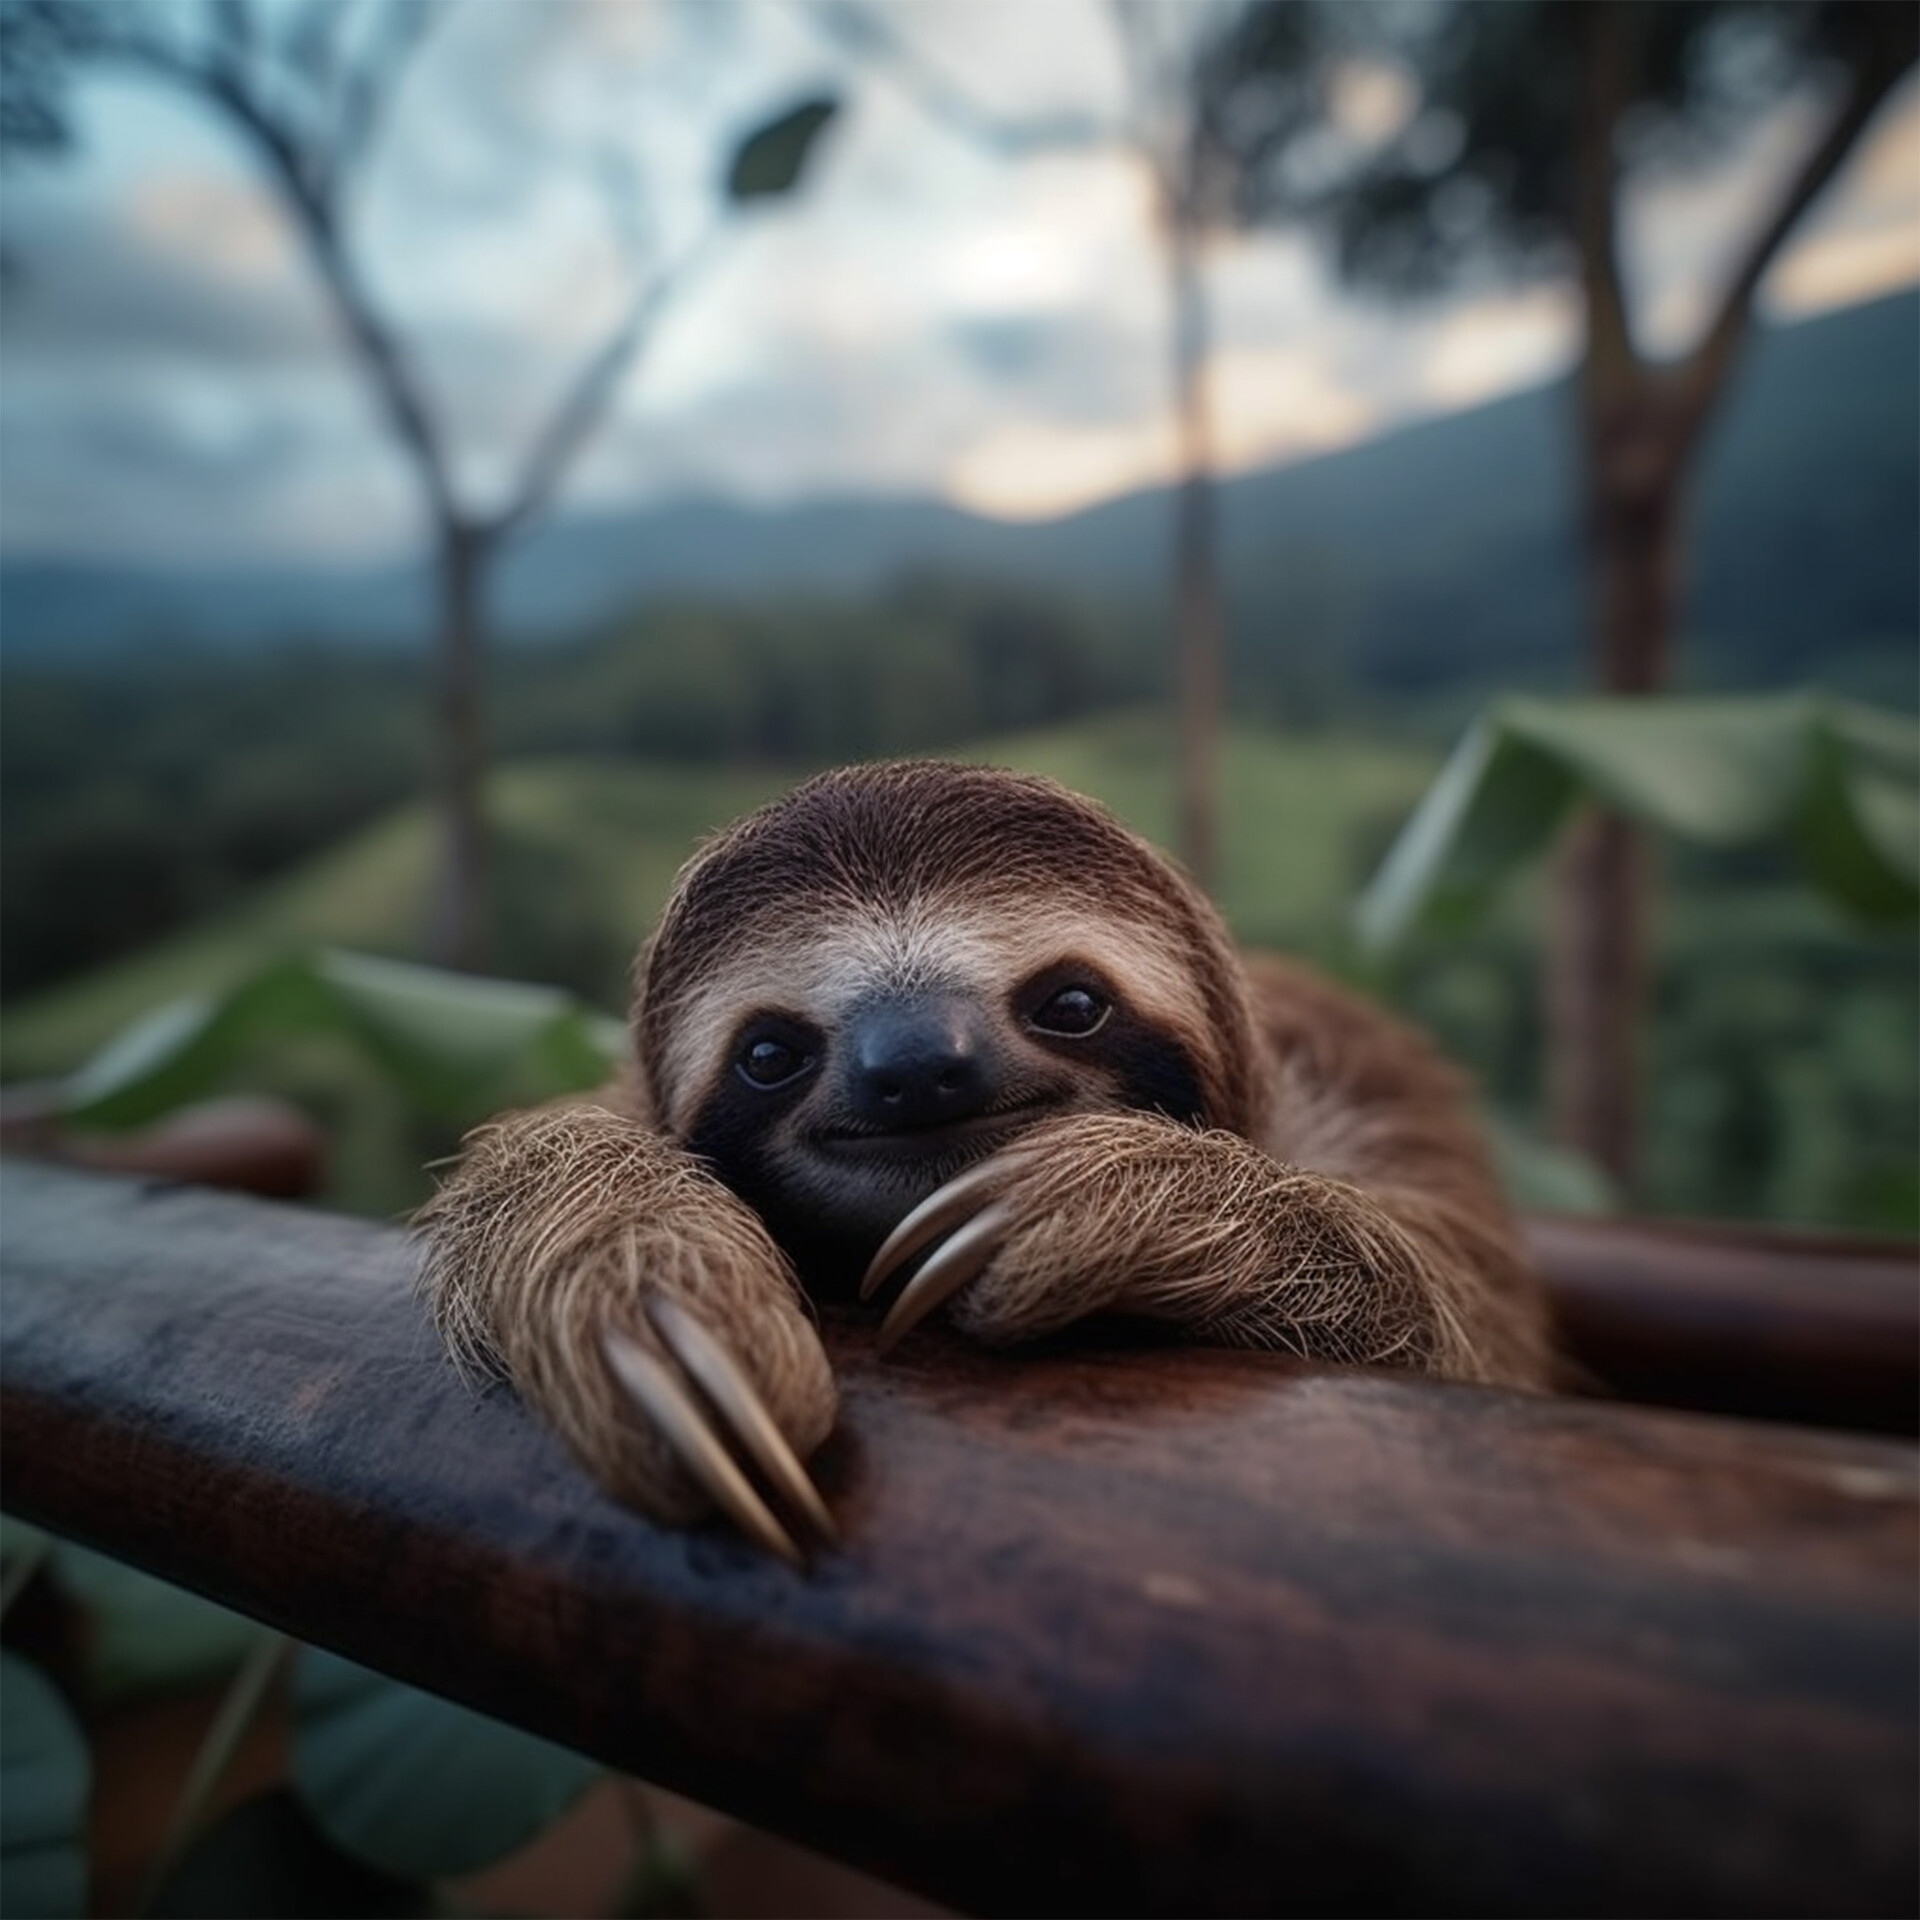 ArtStation - The Art of Relaxation: A Sloth Unwinding in its Natural Domain